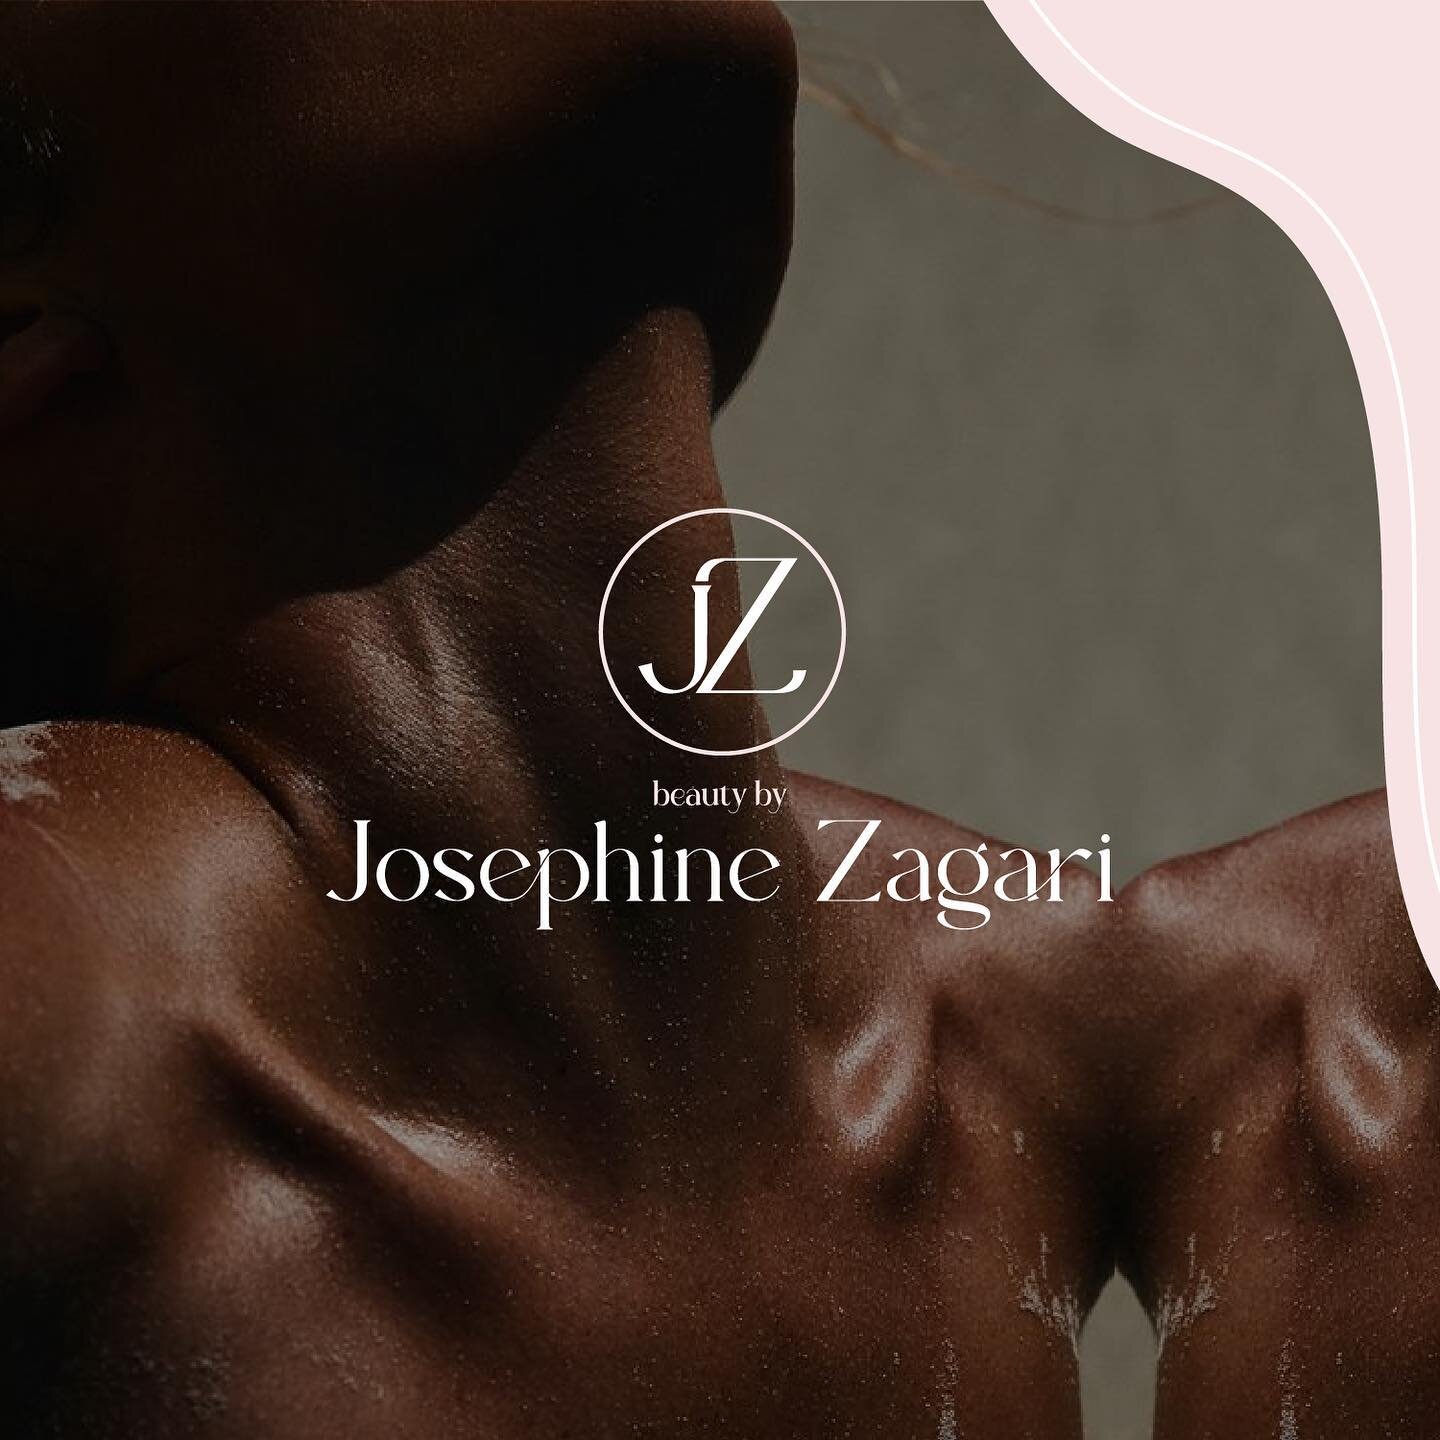 New look for @beautybyjosephinezagari 💕

Your logo is a central part of your business branding, as it&rsquo;s usually the first point of contact for most potential clients. 

So what makes a good logo? 
1. Simple
2. Relevant 
3. Memorable 
4. Timele